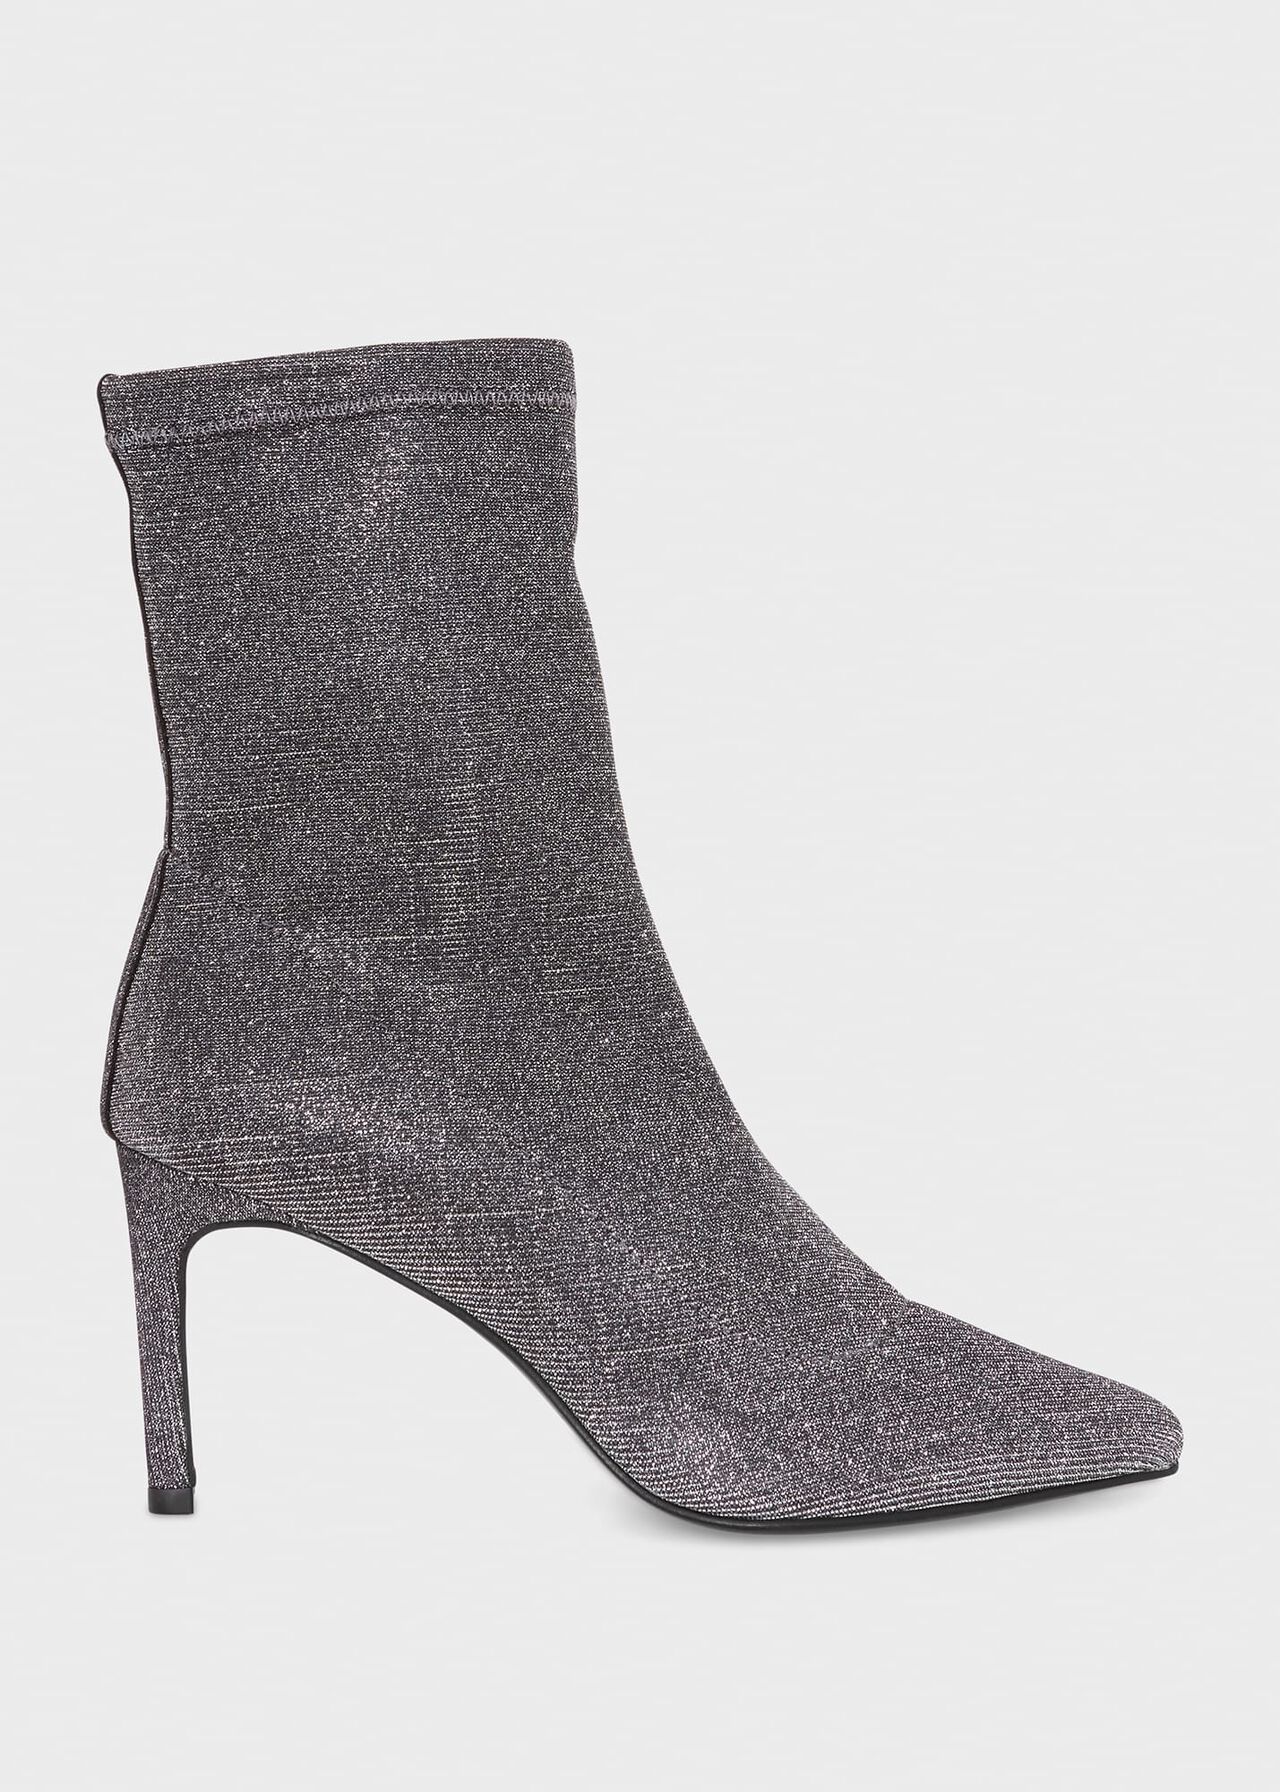 Bayley Stretch Sparkle Boots, Silver, hi-res